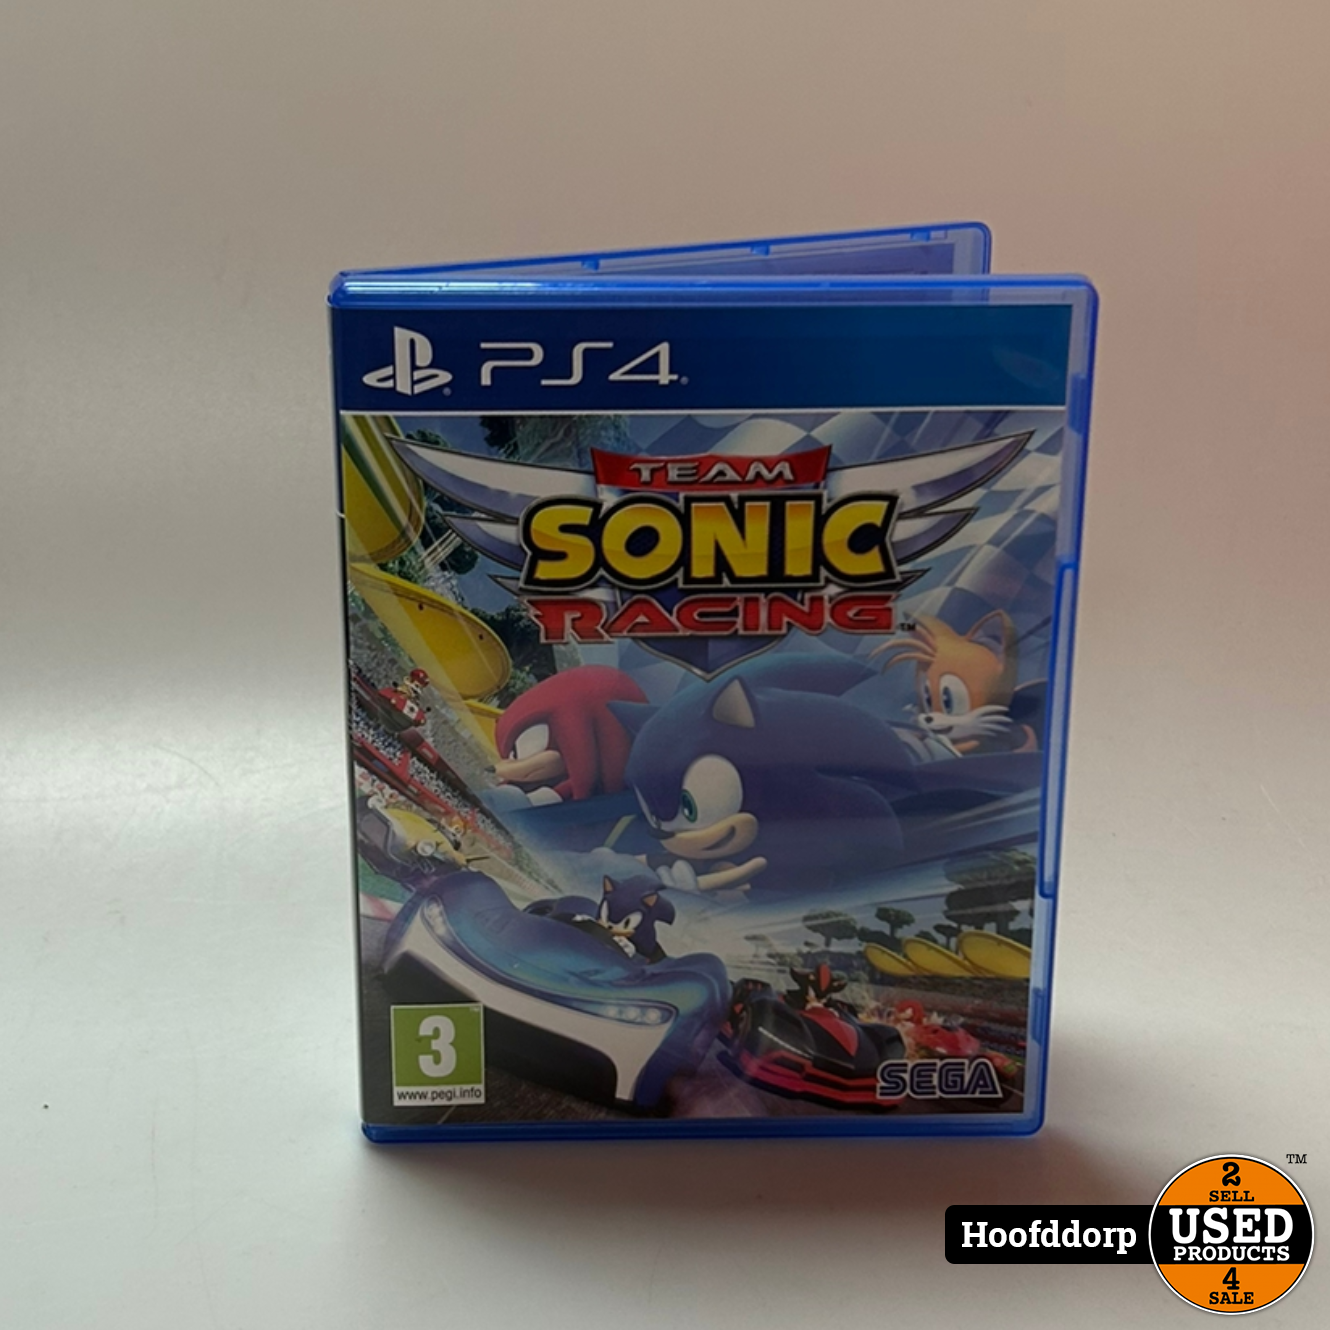 systeem Purper speelgoed Playstation 4 Game : Team Sonic Racing - Used Products Hoofddorp